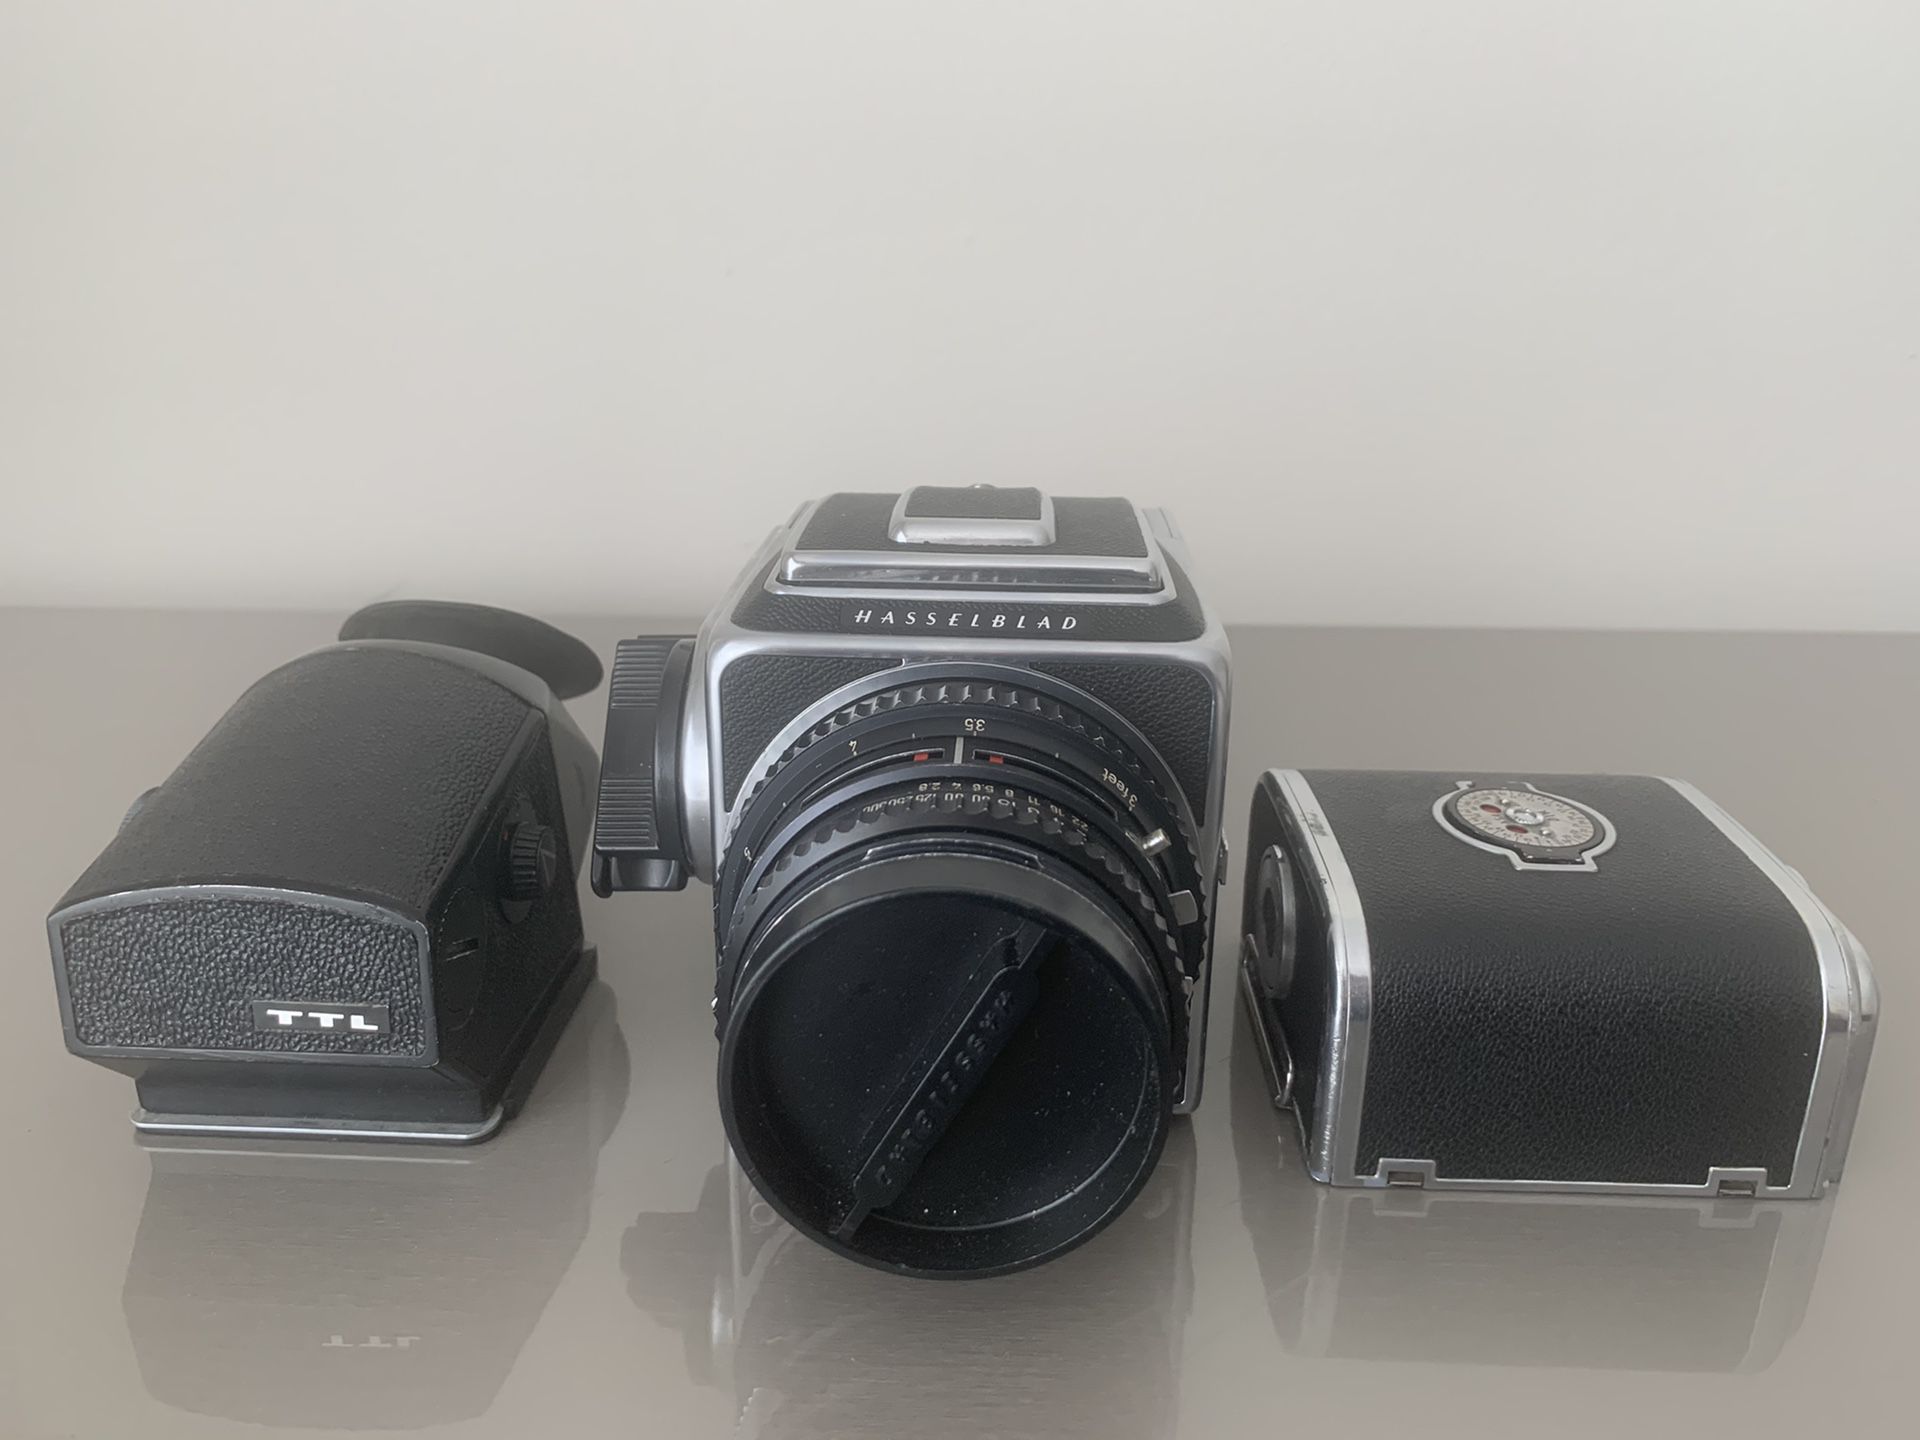 Hasselblad 500CM with 80mm lens, two backs, and TTL meter